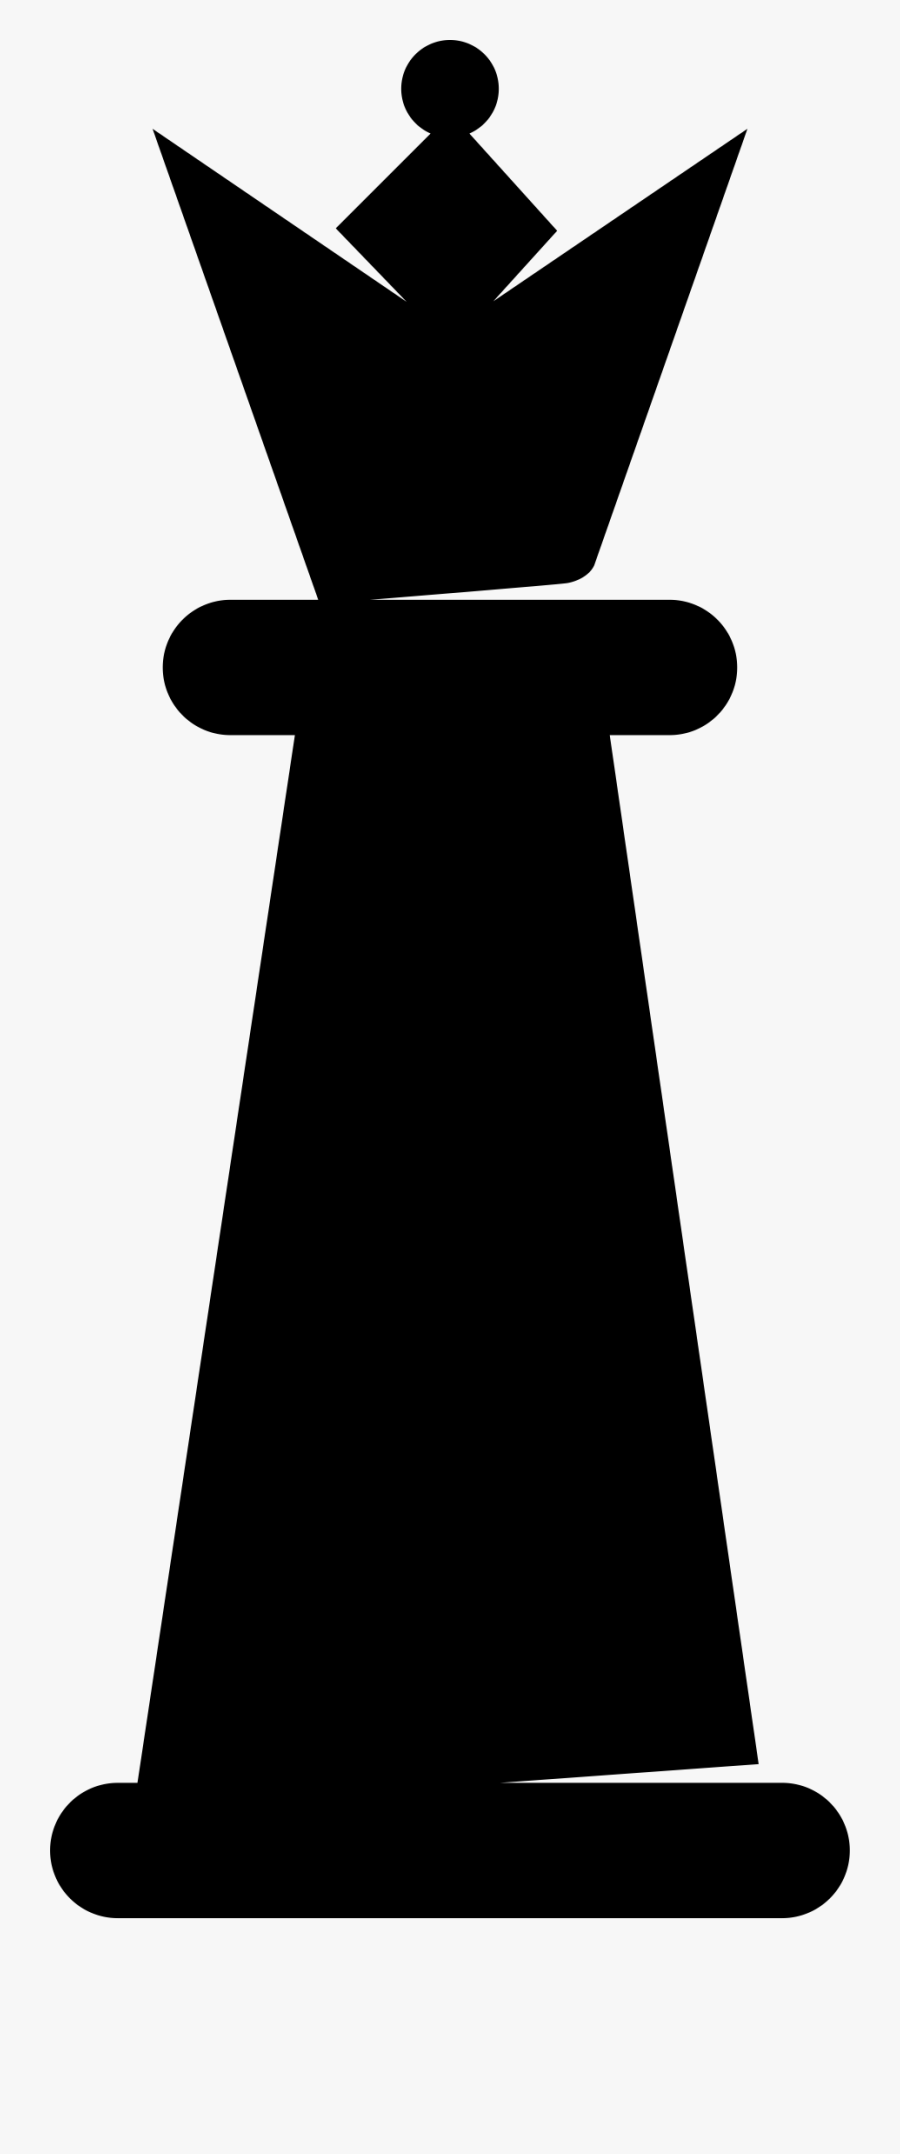 Thumb Image - Chess Piece Queen Clipart, Transparent Clipart